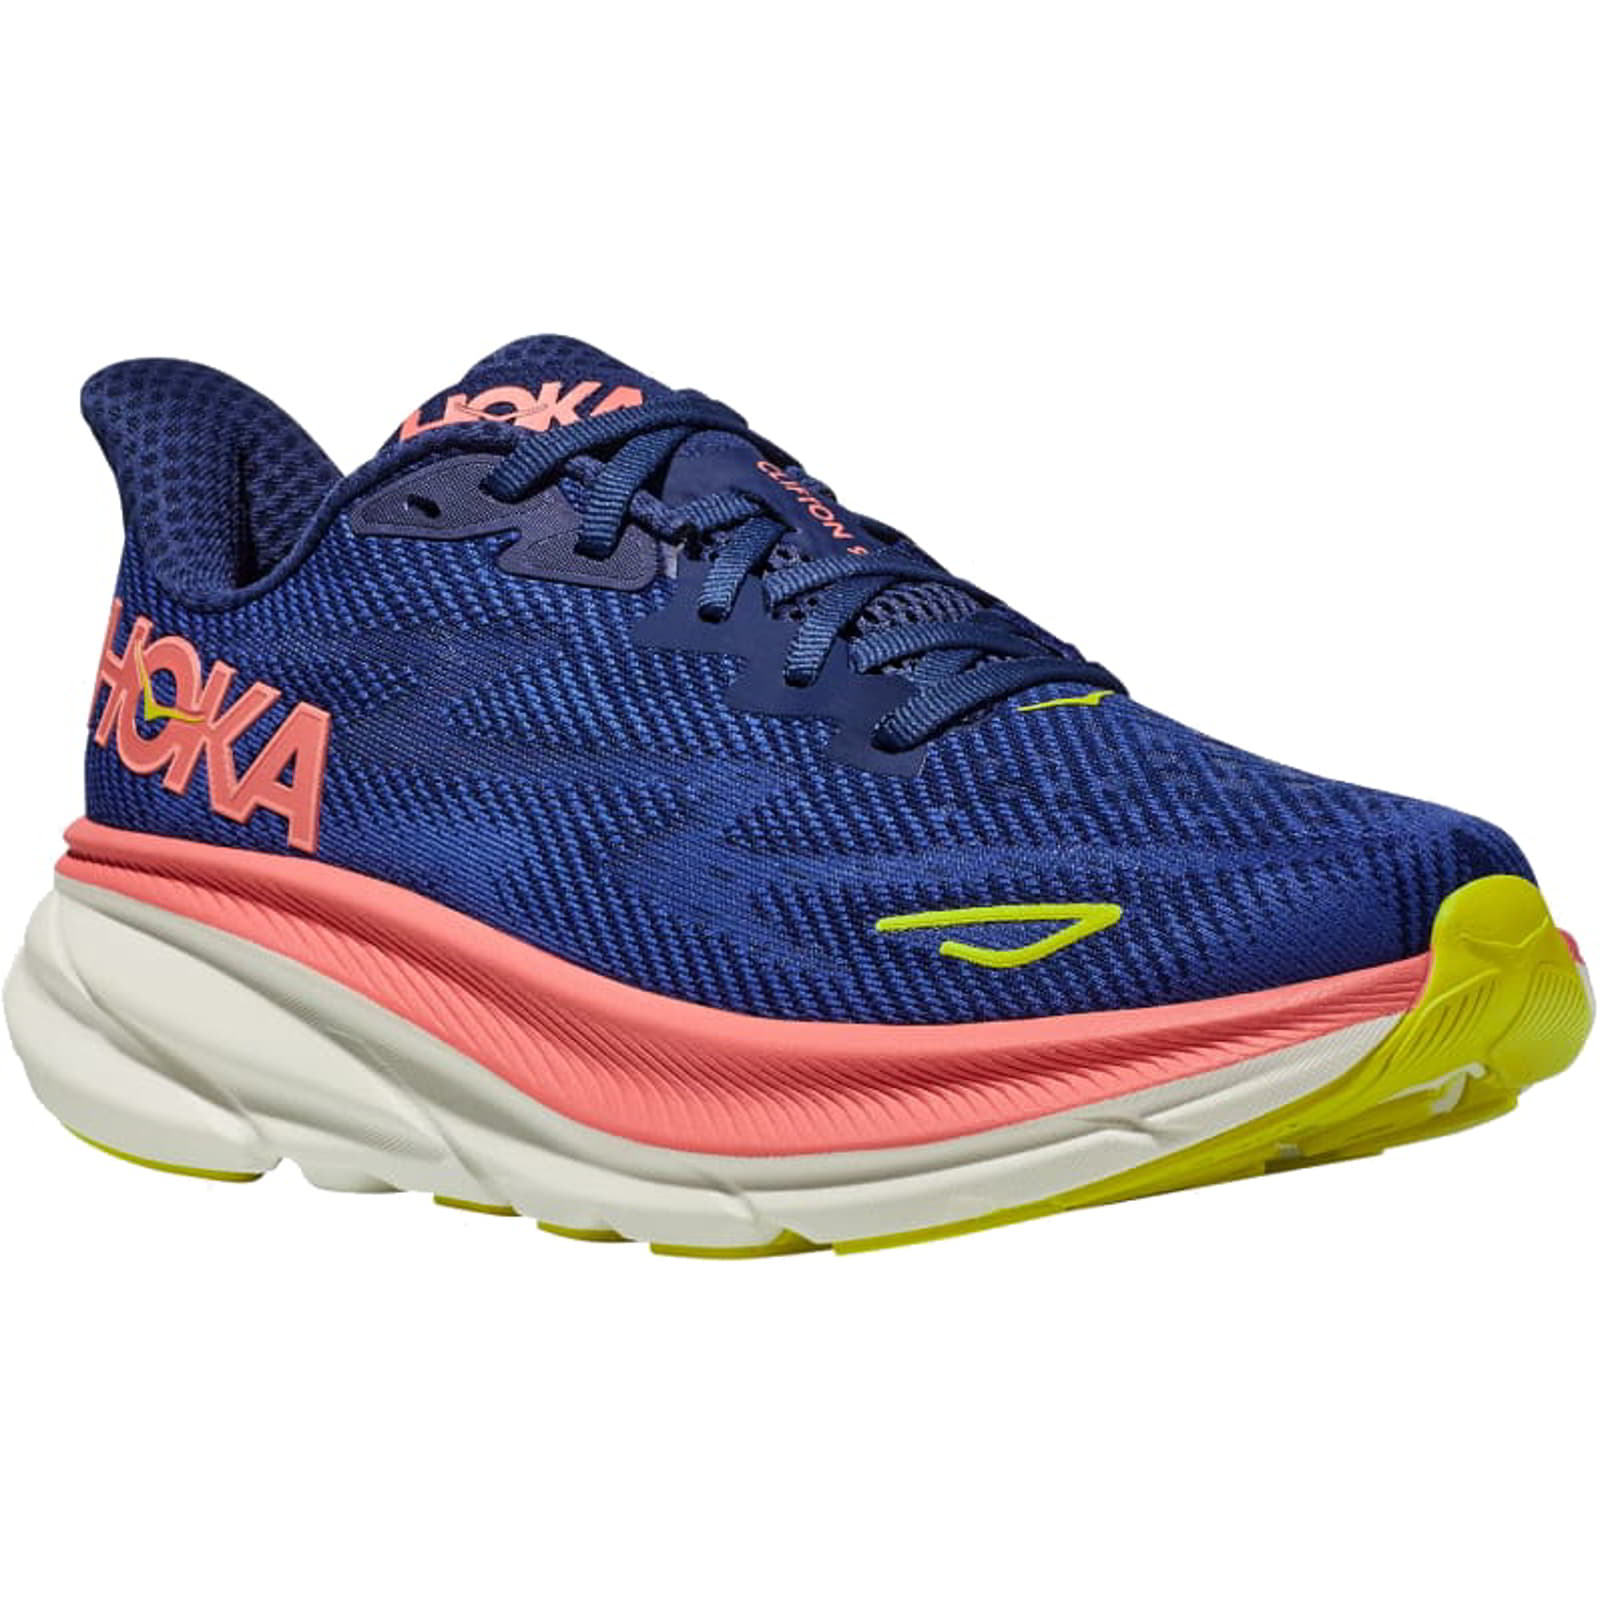 Hoka Women's Clifton 9 Lace Up Running Shoes Trainers - UK 6.5 / US 8